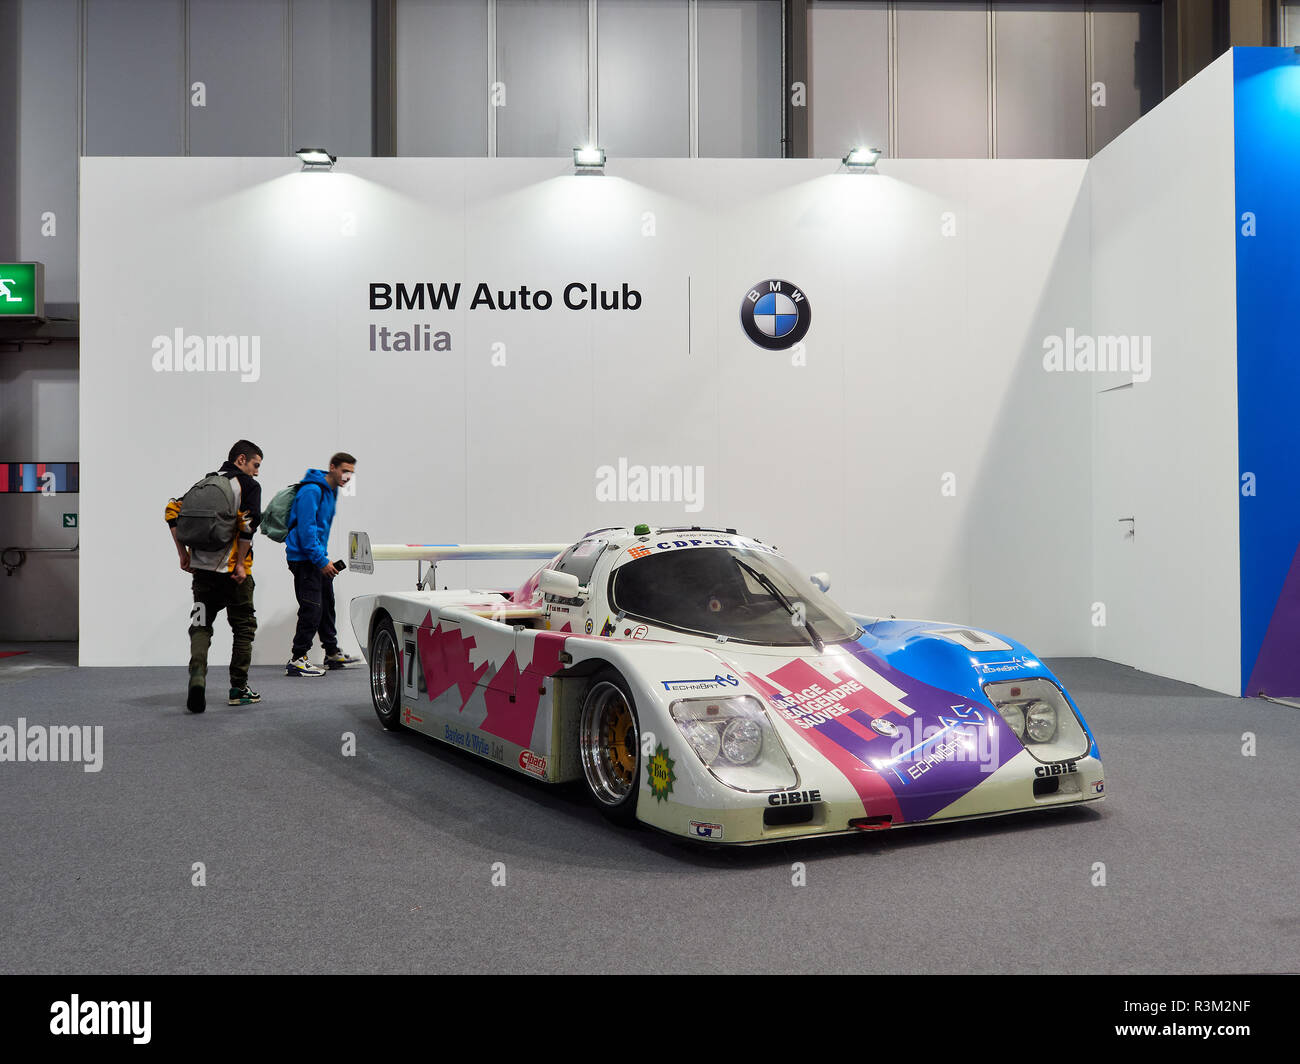 Milan, Lombardy Italy - November 23 , 2018 - Visitors of Autoclassica Milano 2018 approach a BMW racing car at BMW Auto Club stand Credit: Armando Borges/Alamy Live News Stock Photo